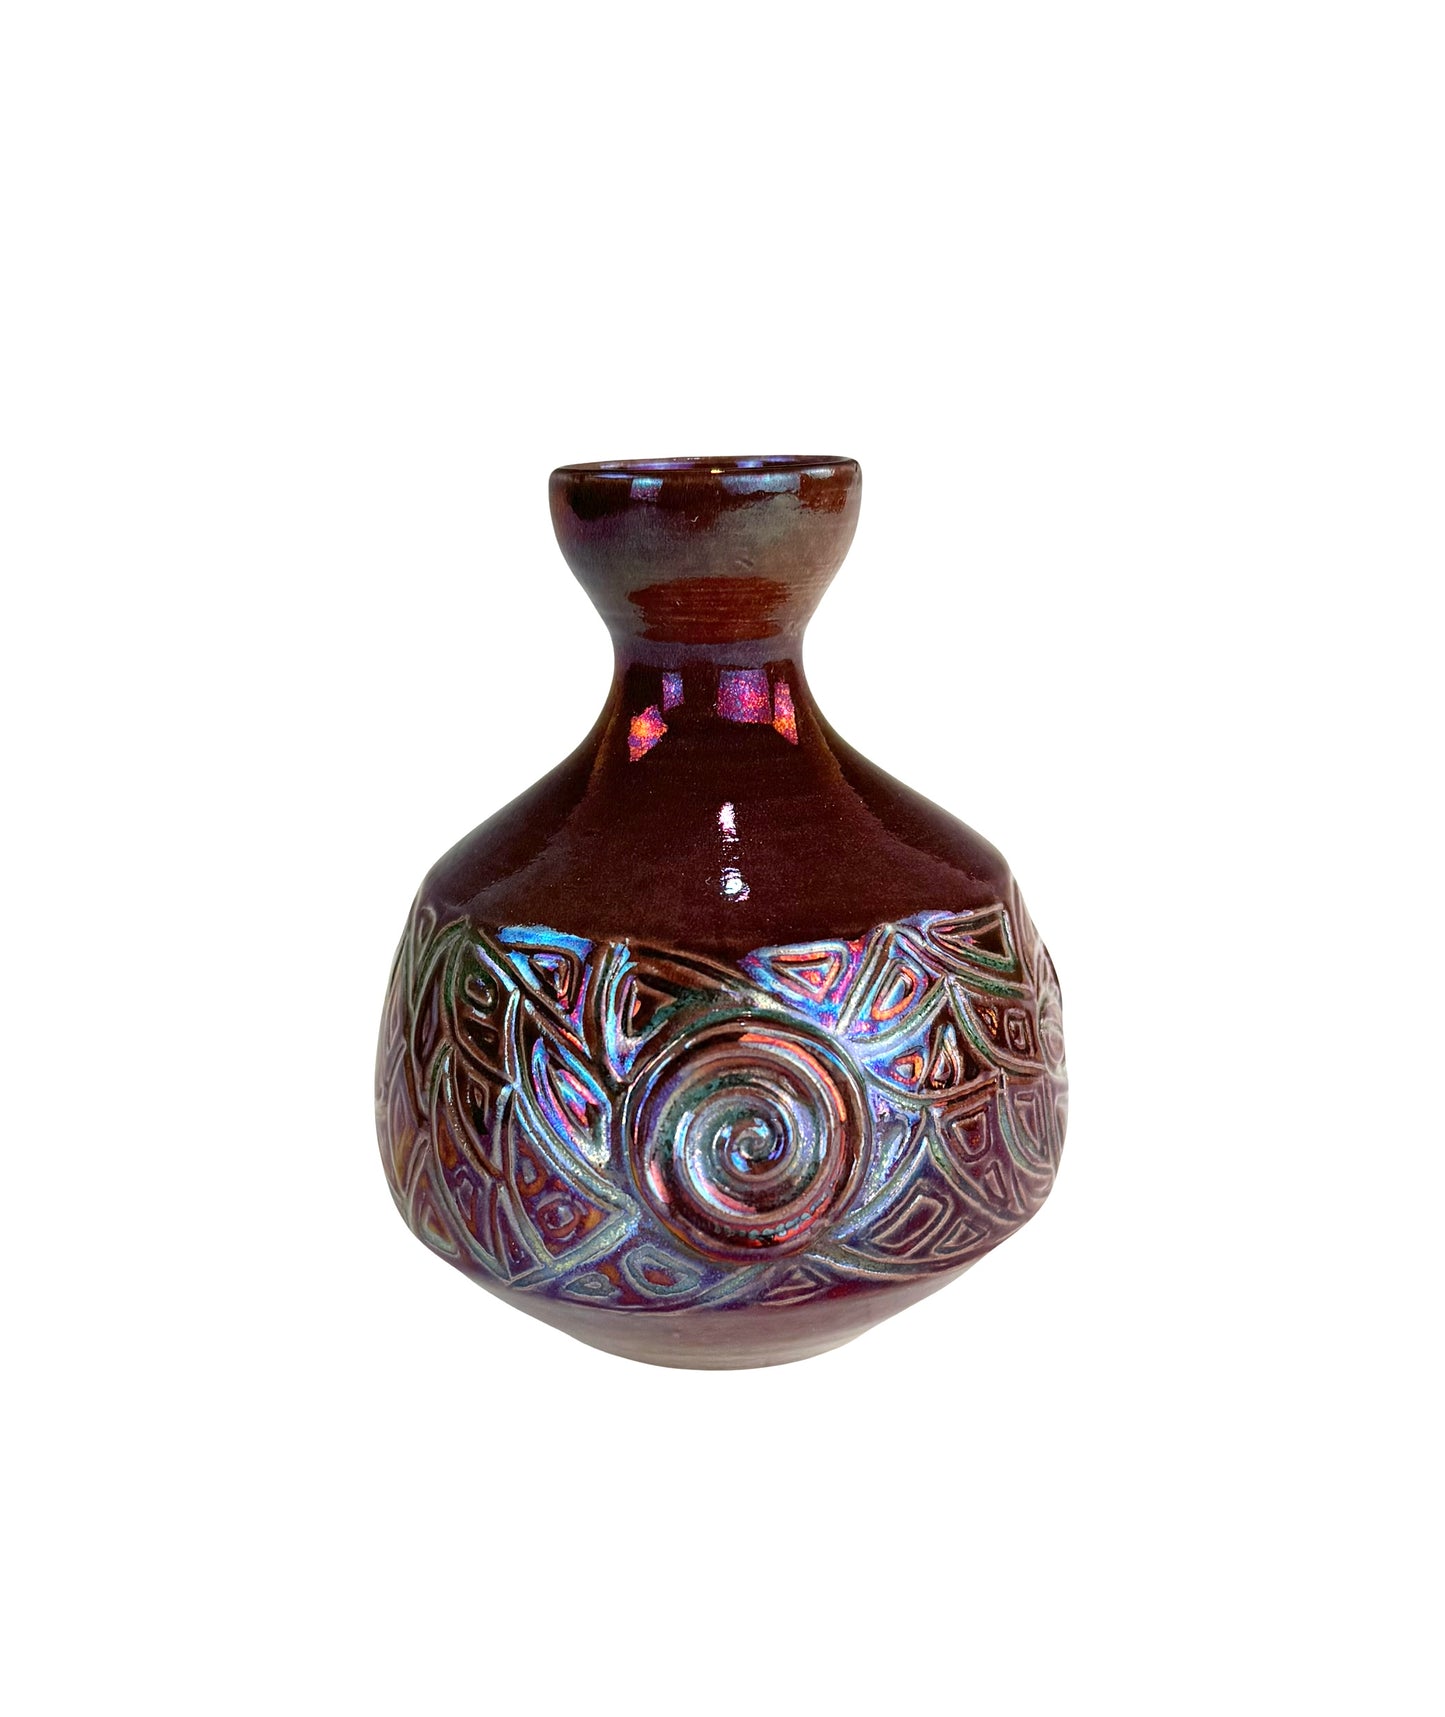 Copper Red Luster Vase with Carved Swirl Band